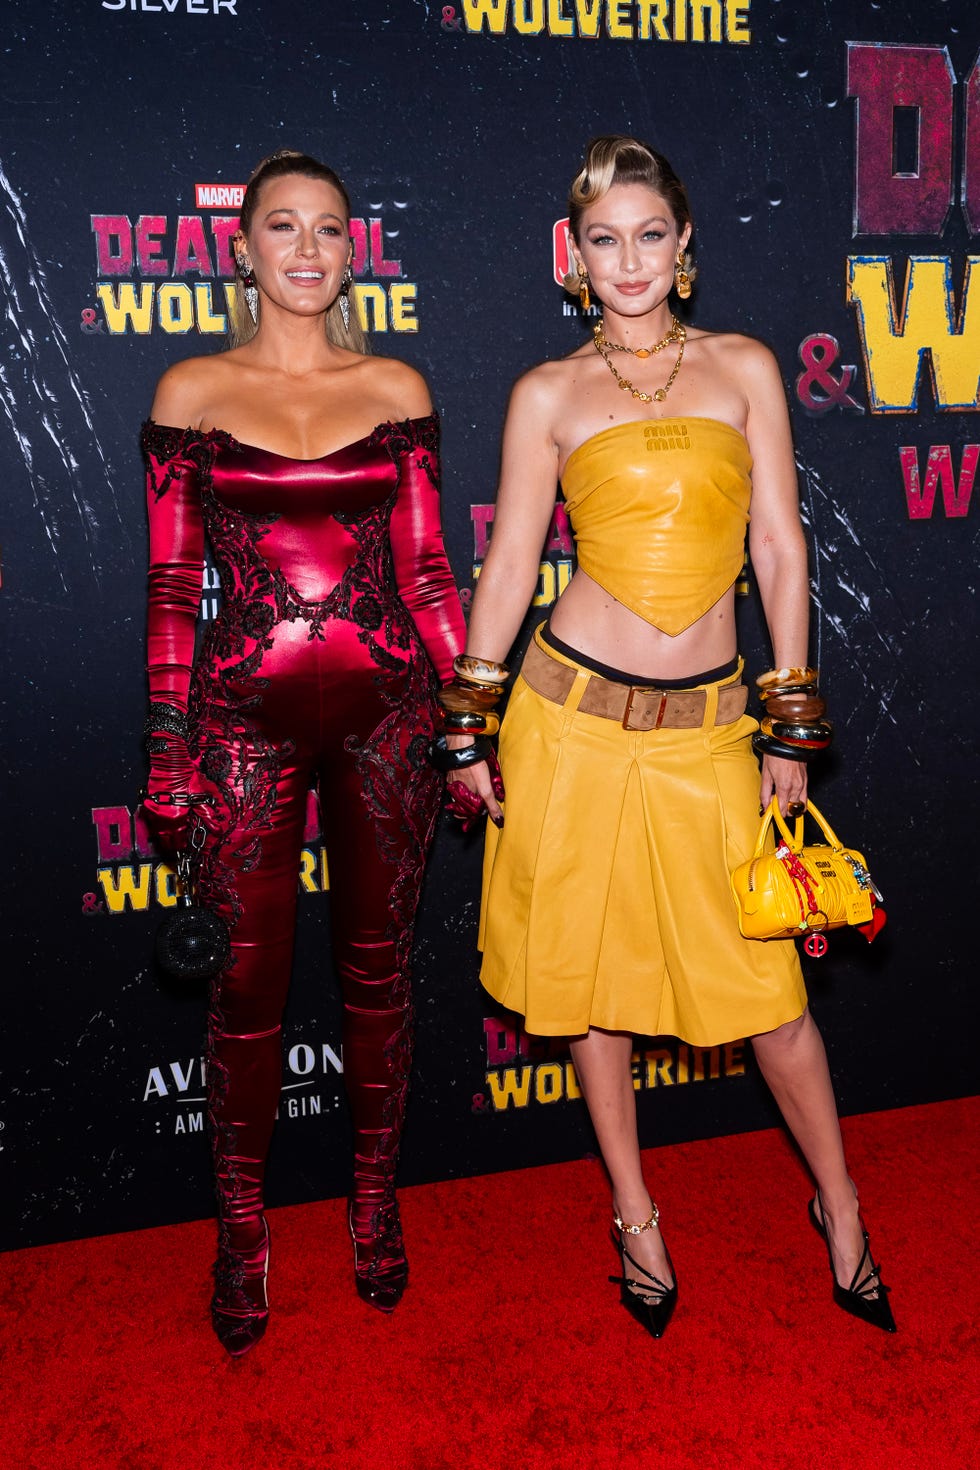 Blake Lively and Gigi Hadid Stun in Marvel-Inspired Outfits at Deadpool & Wolverine Premiere